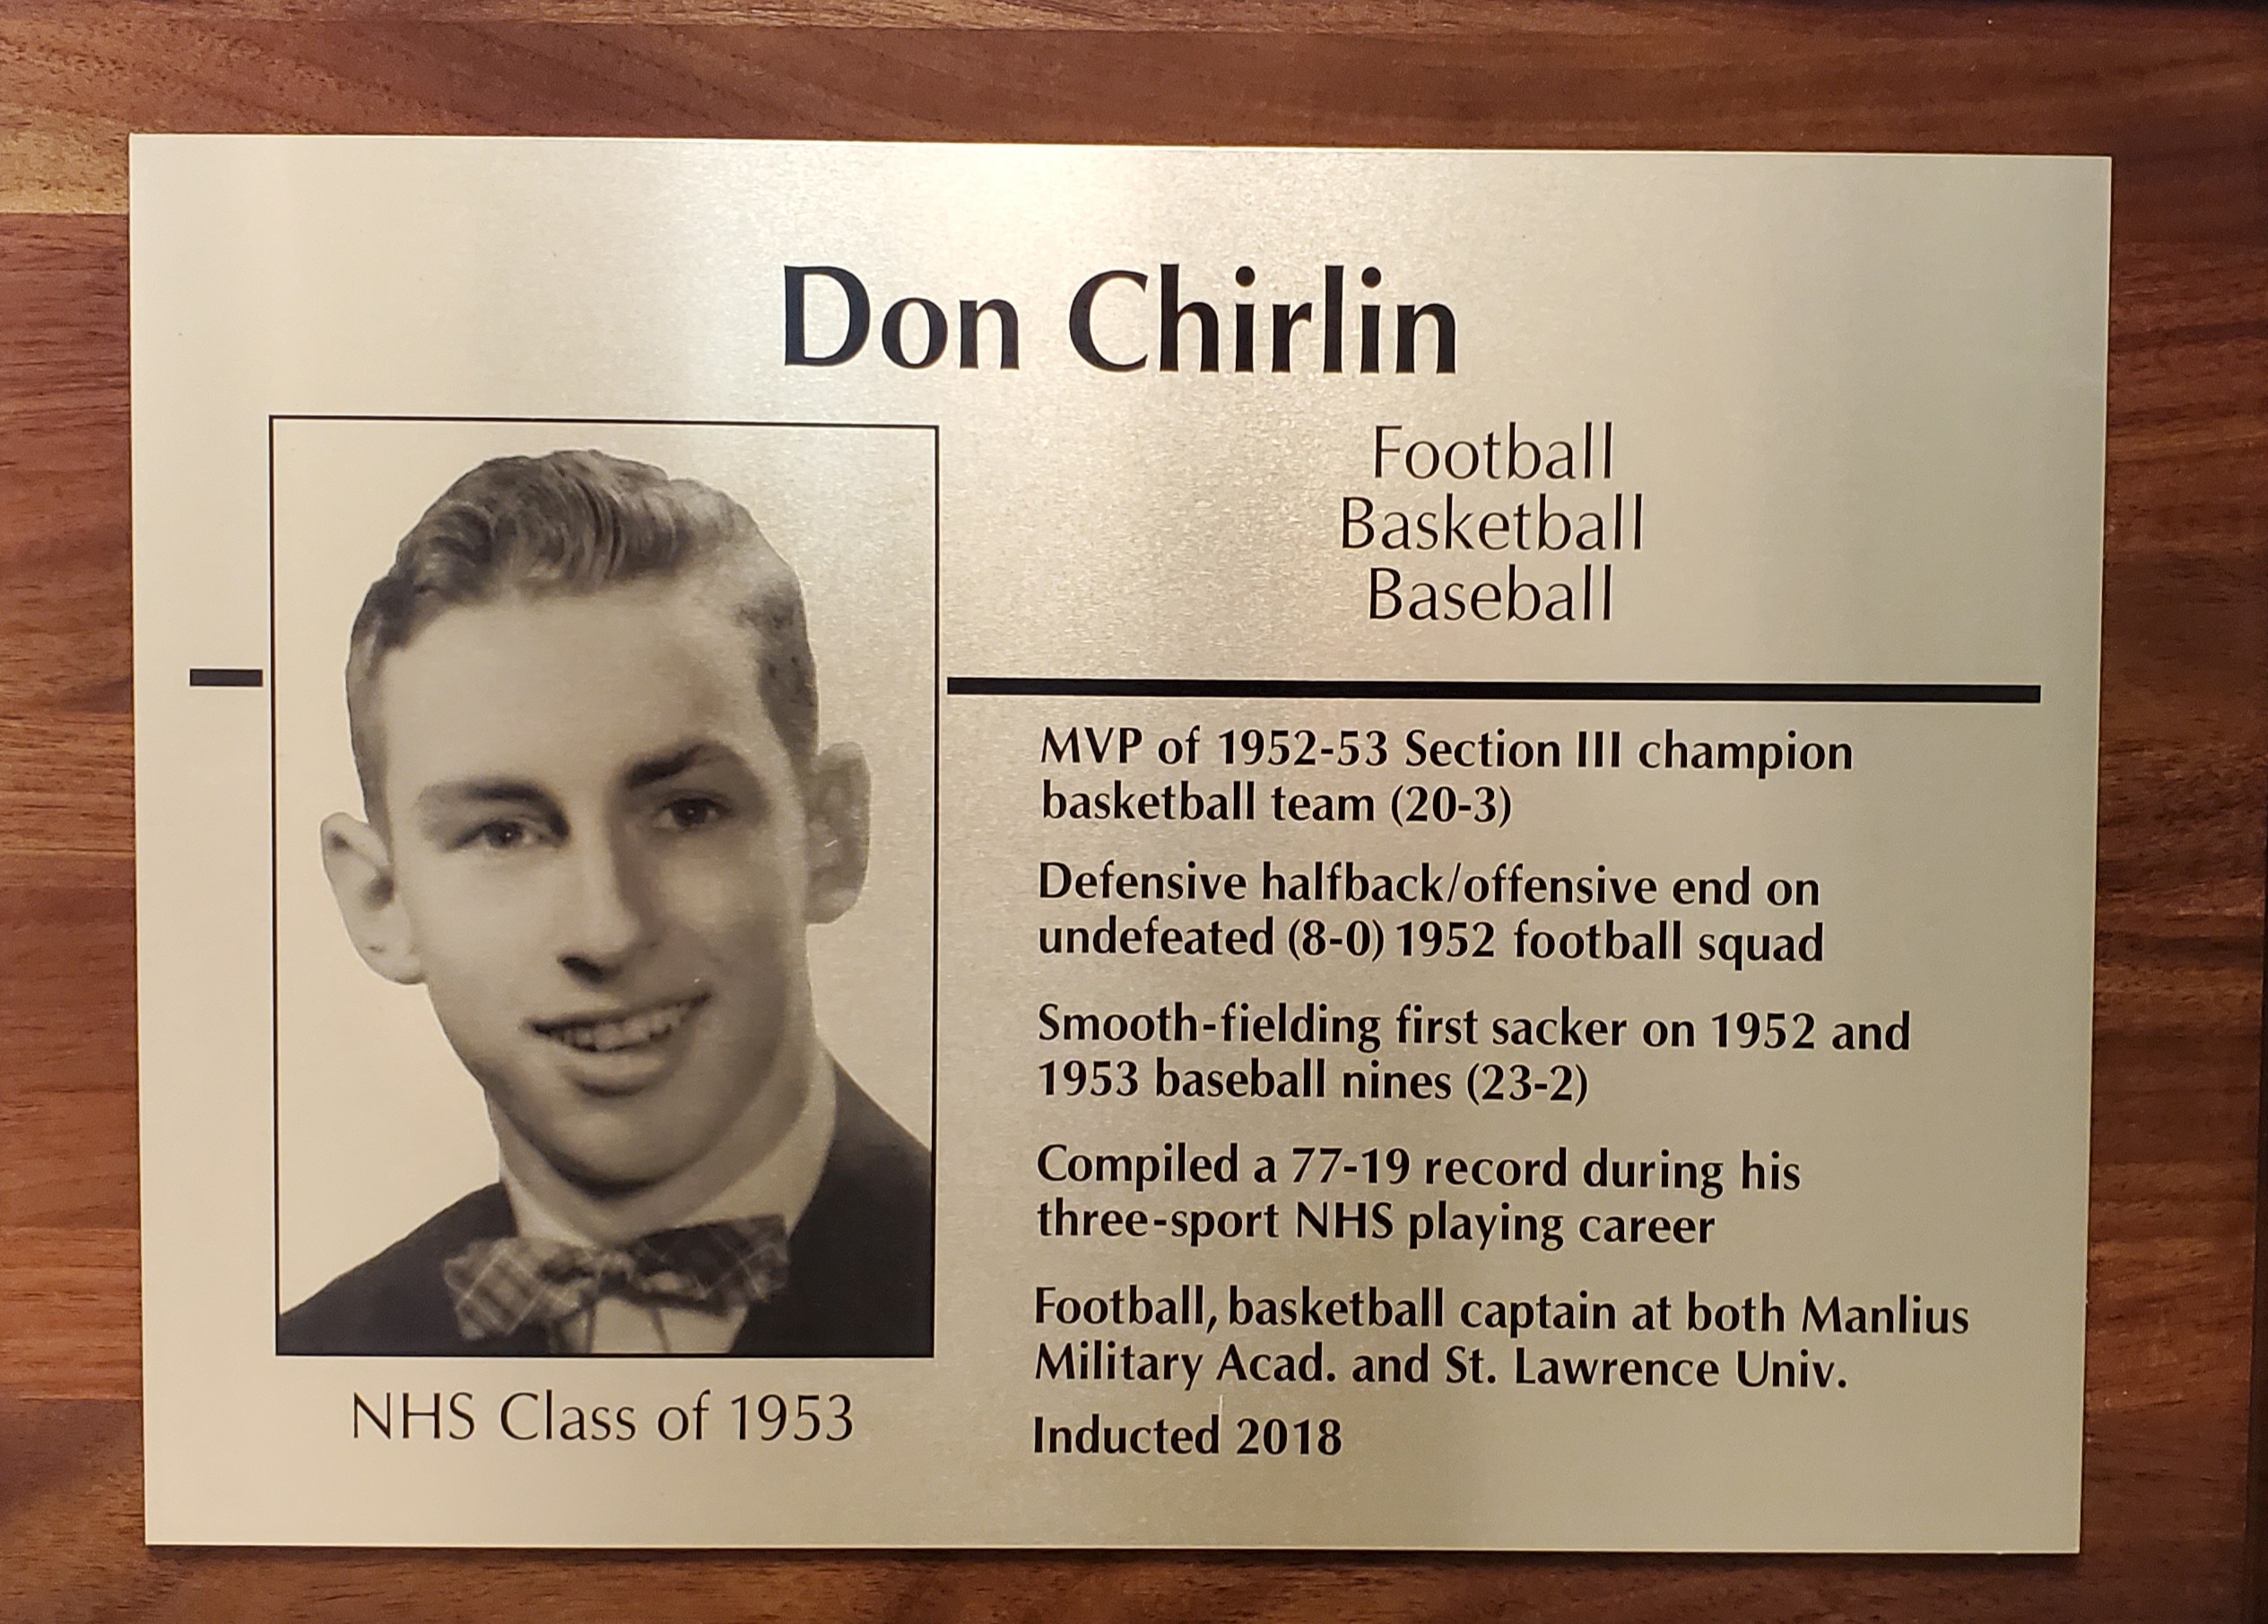 Don Chirlin